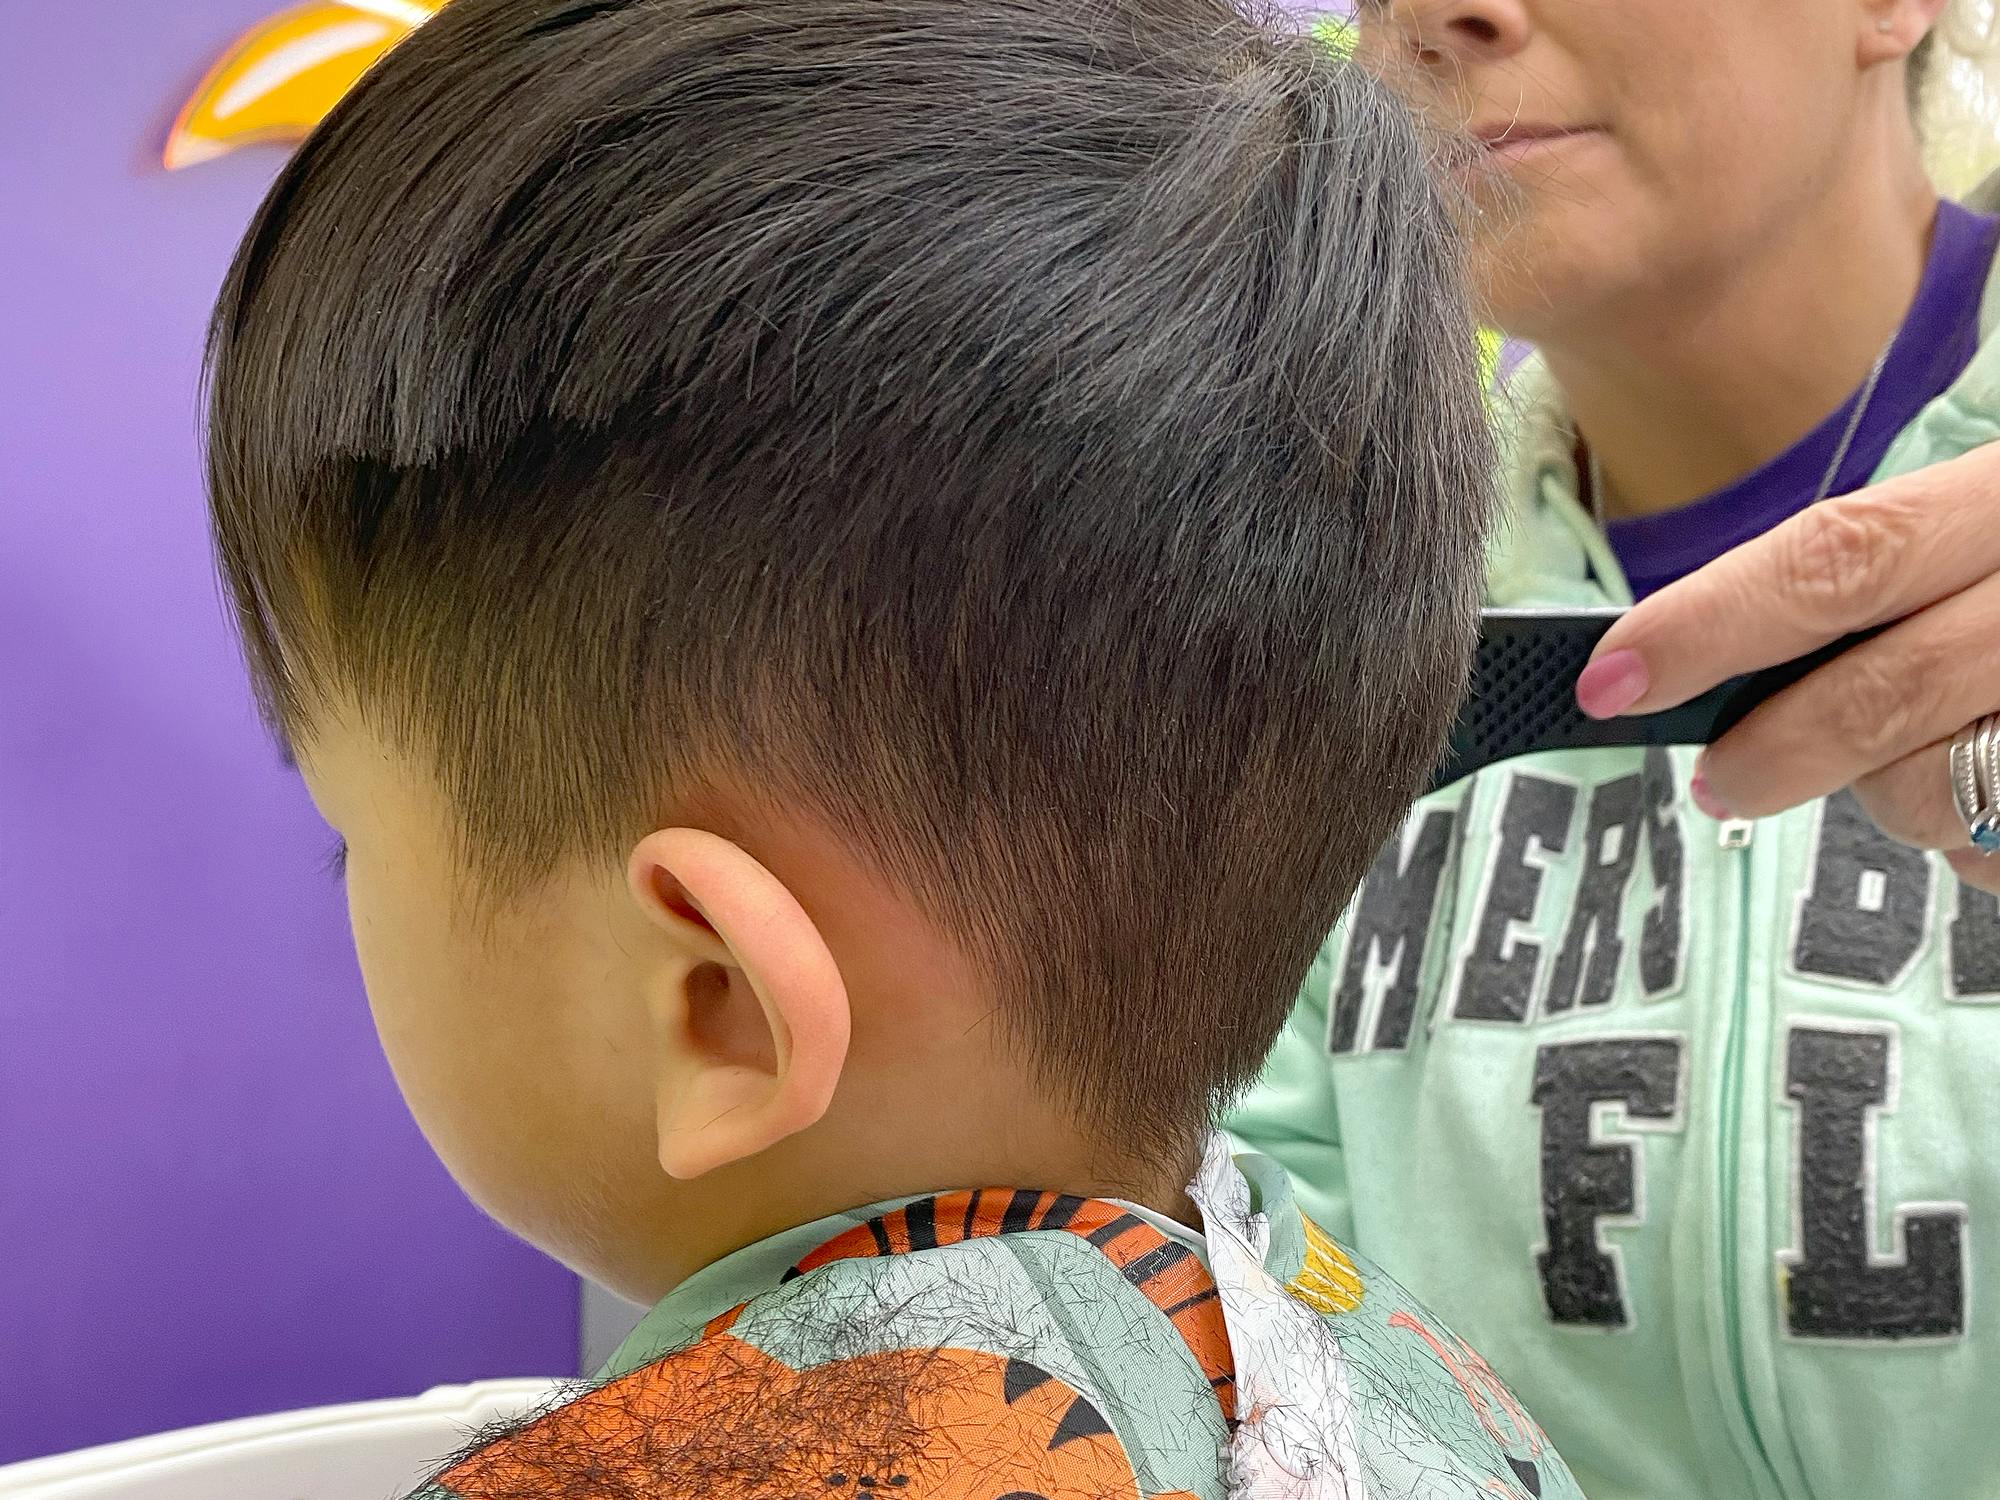 Find Cheap Haircuts for the Whole Family With Savings Up to 75